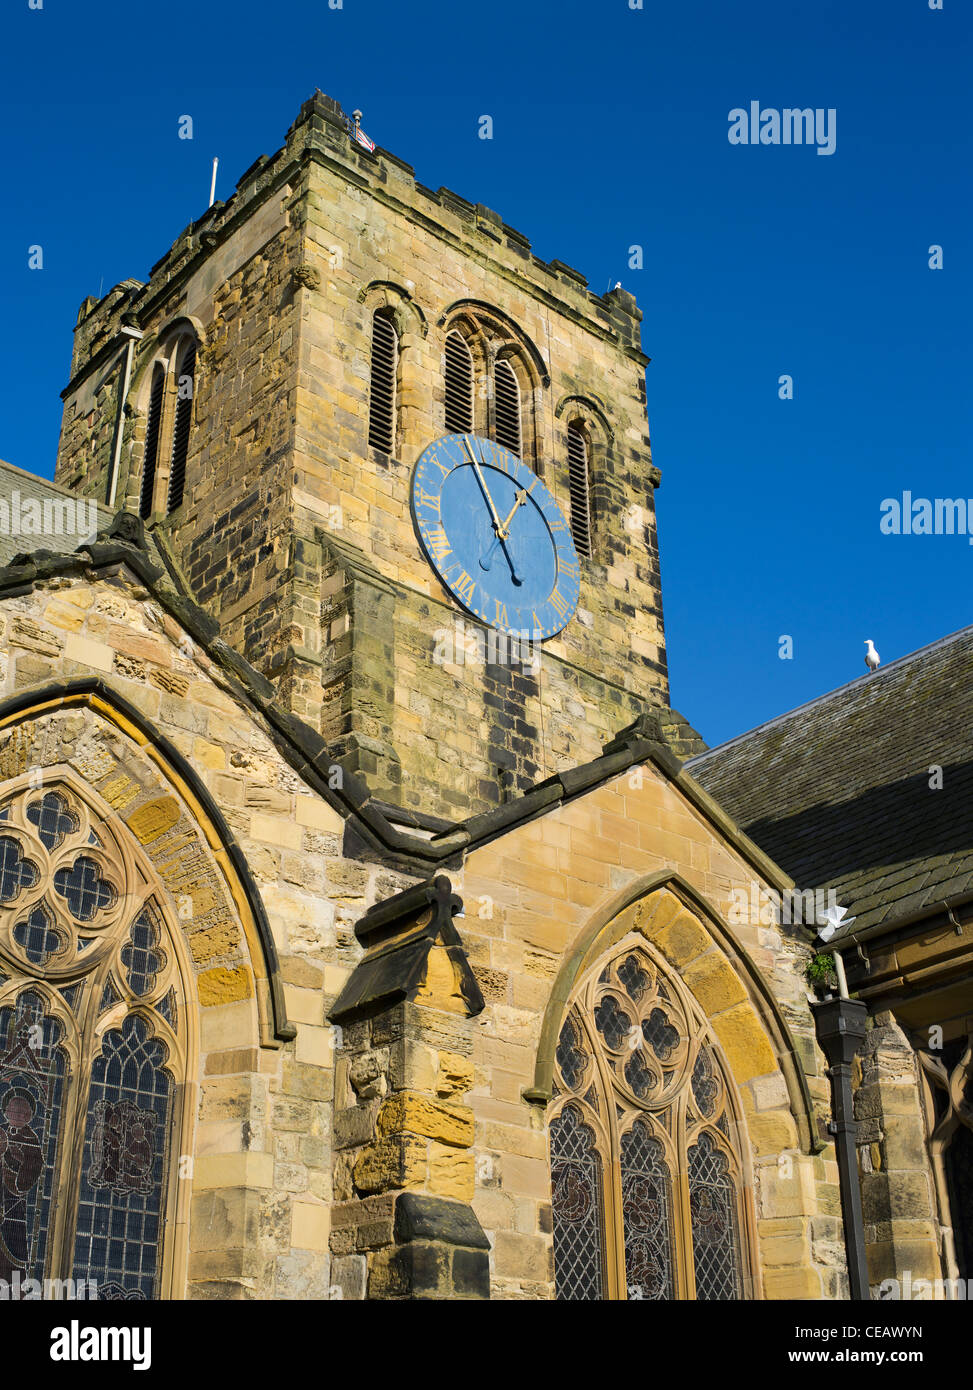 dh Church of St Mary SCARBOROUGH NORTH YORKSHIRE UK English Clock bell tower belfry england Stock Photo